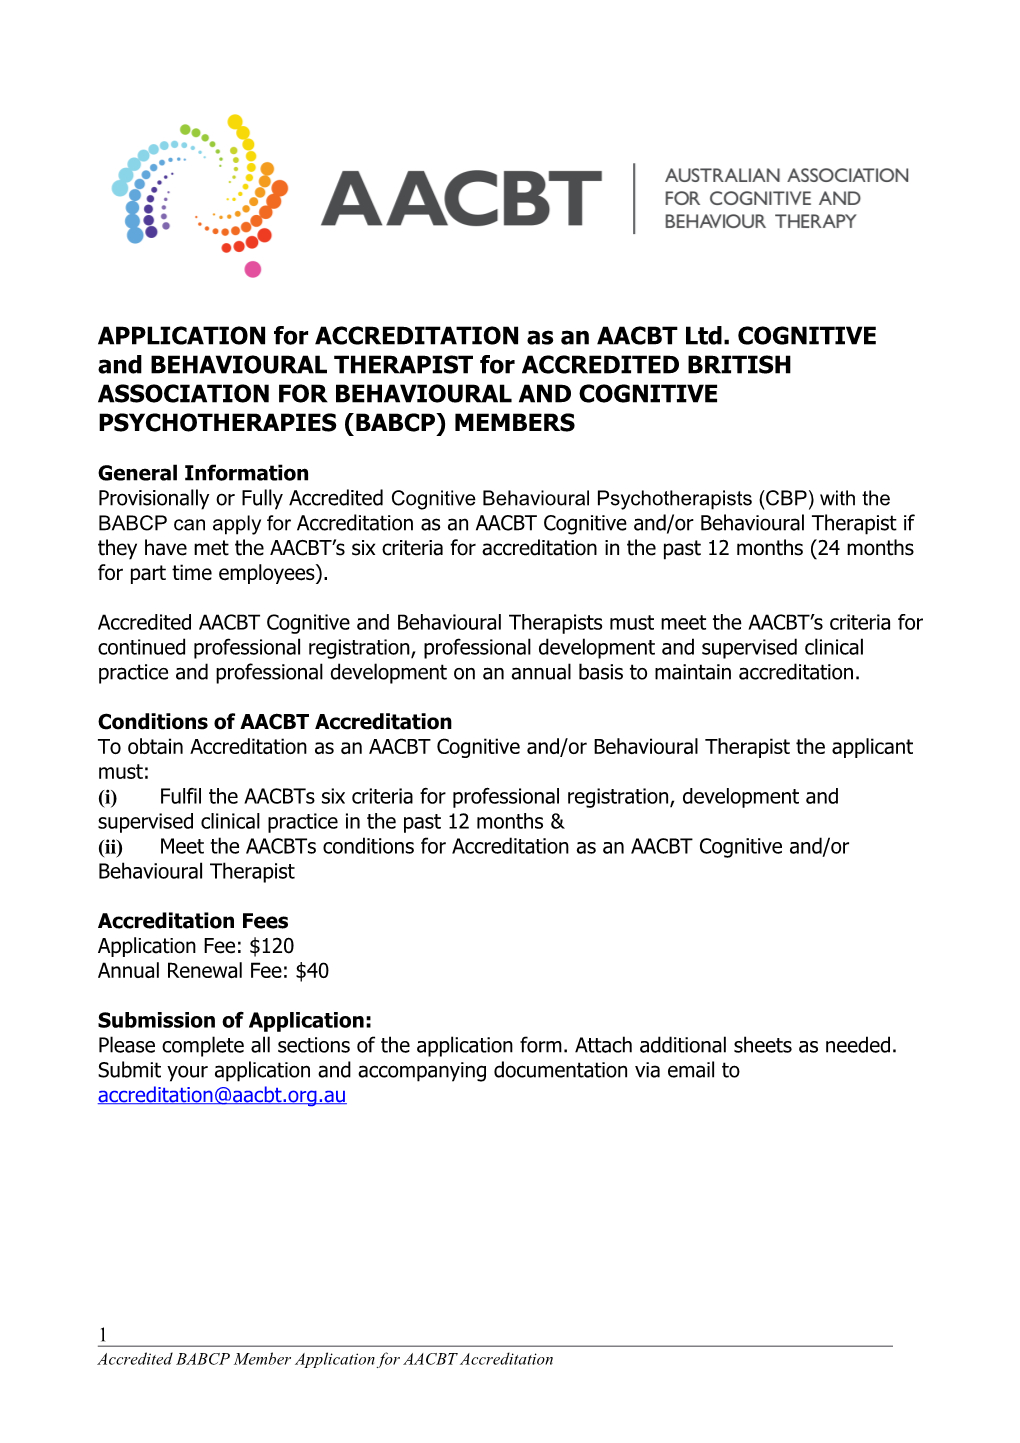 APPLICATION for ACCREDITATION As an AACBT Ltd. COGNITIVE and BEHAVIOURAL THERAPIST For